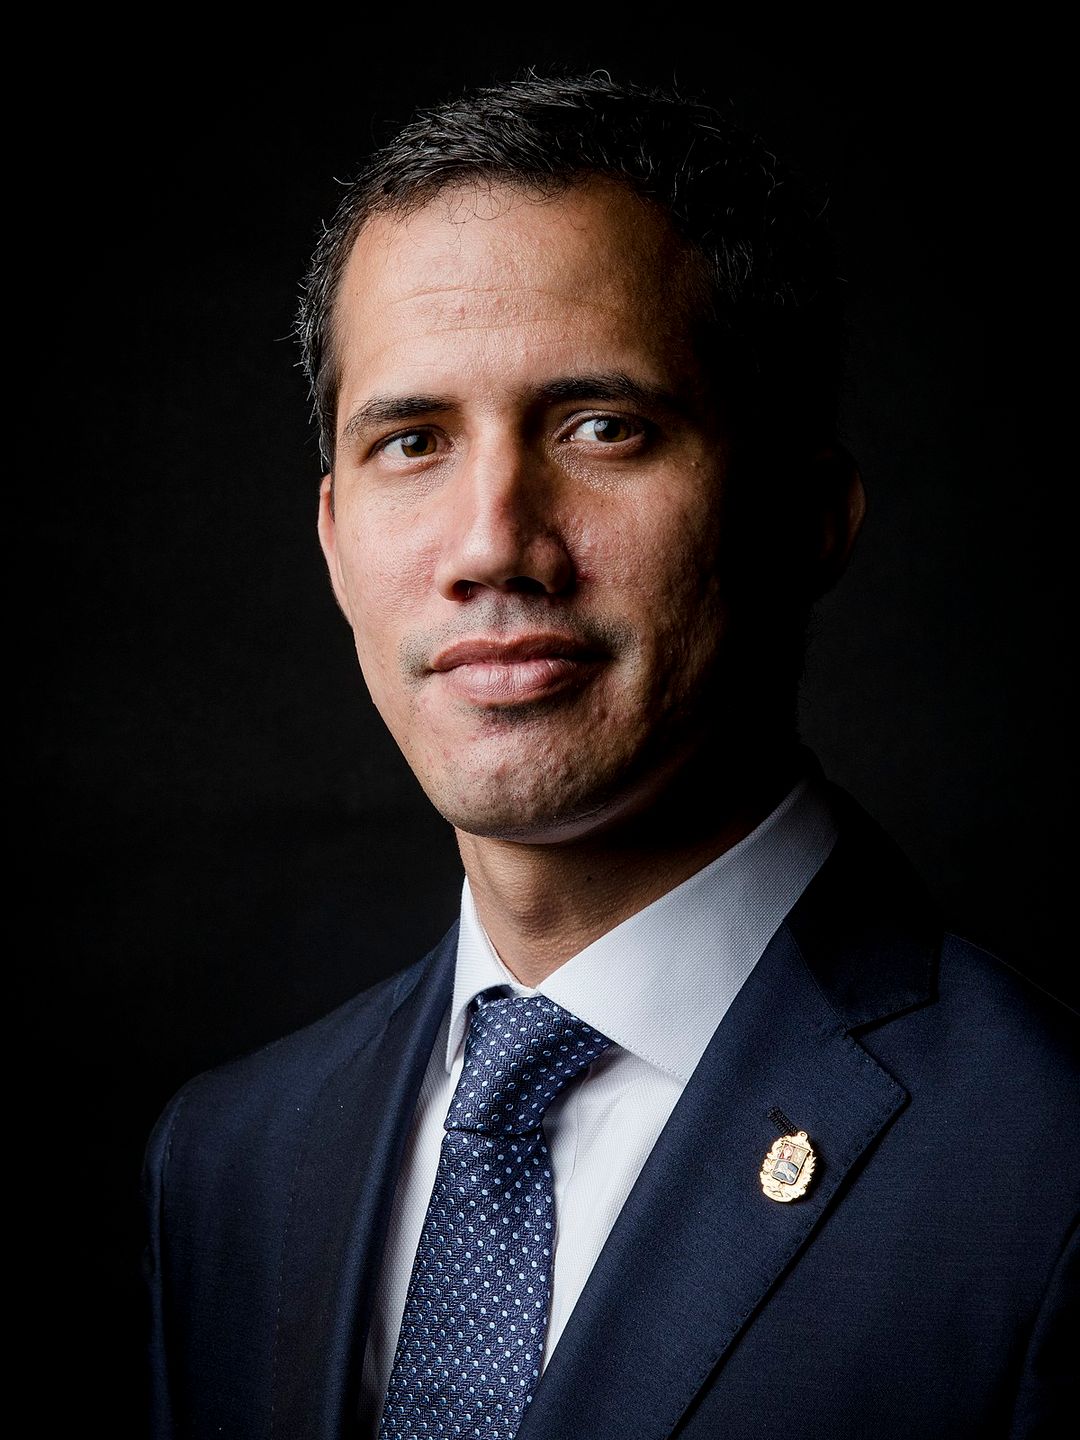 Juan Guaido who is his mother